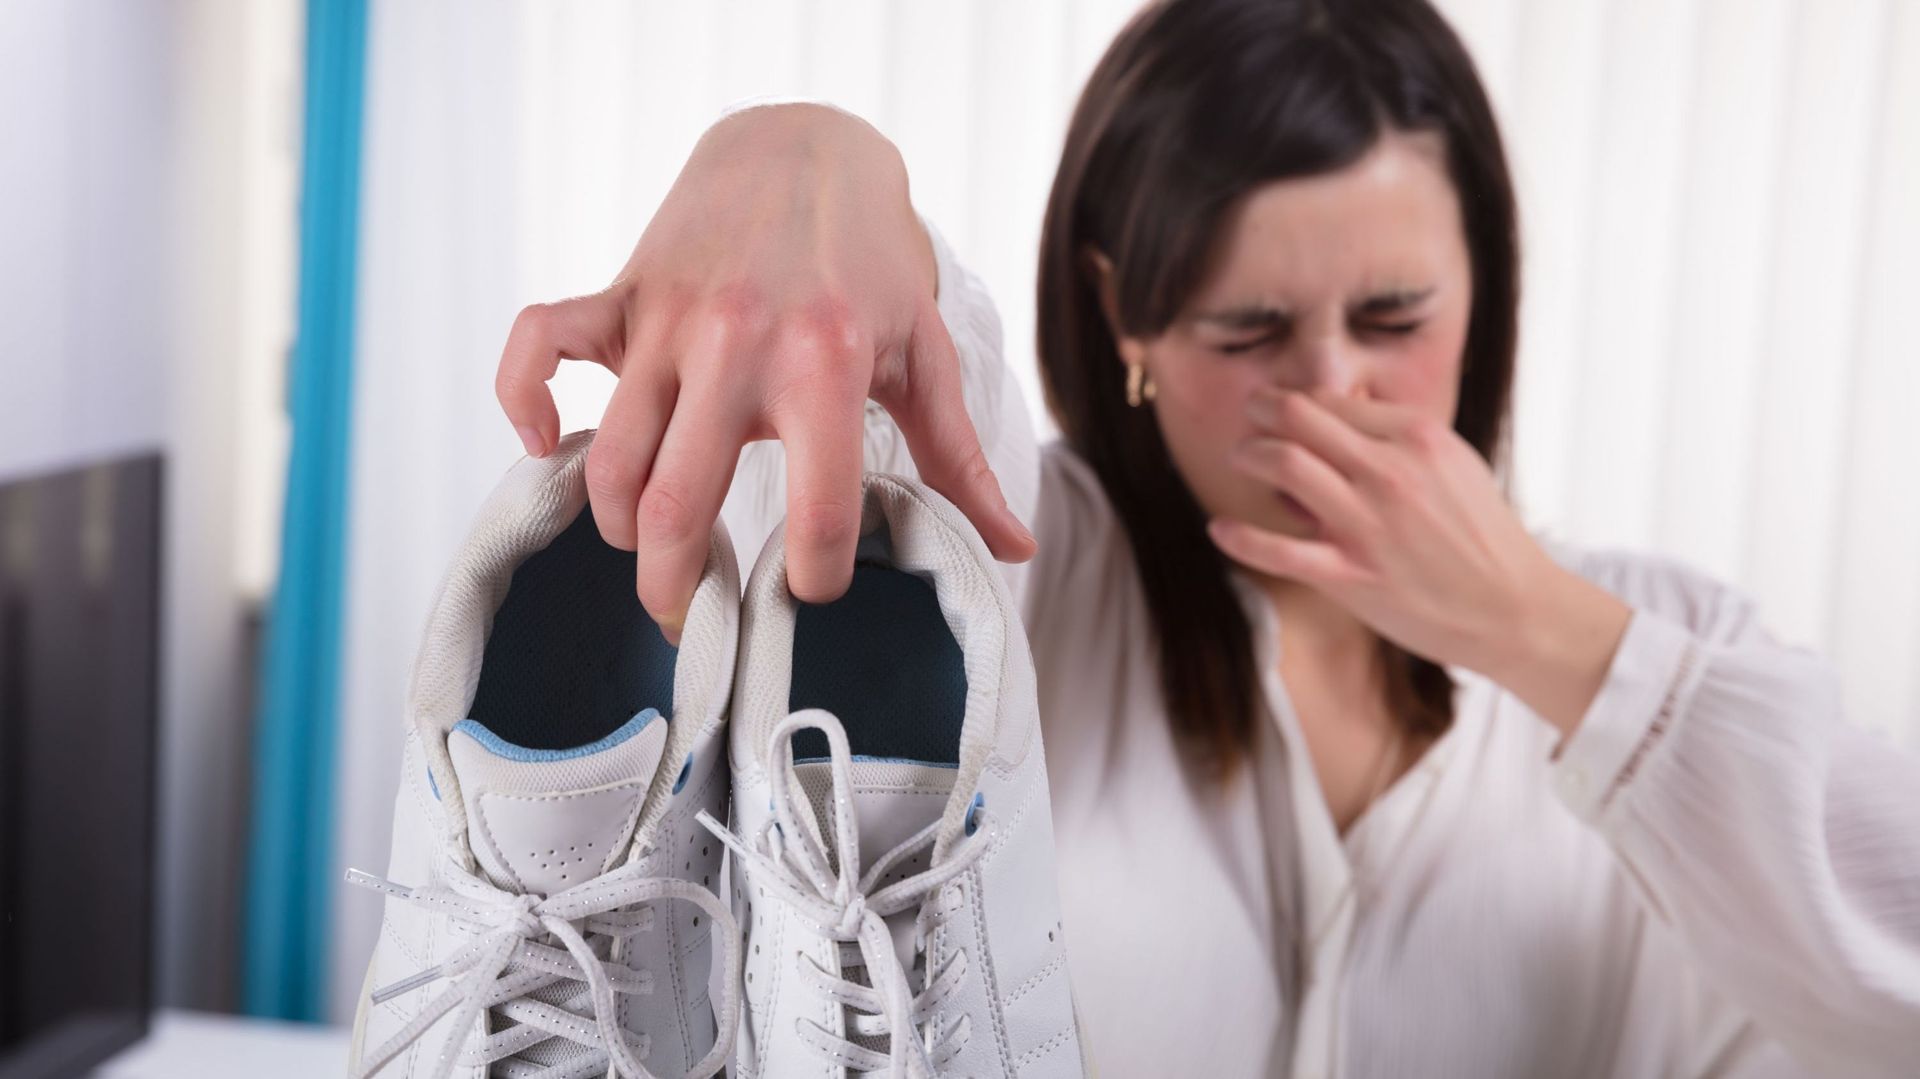 Woman Holding Dirty Smelling Shoes